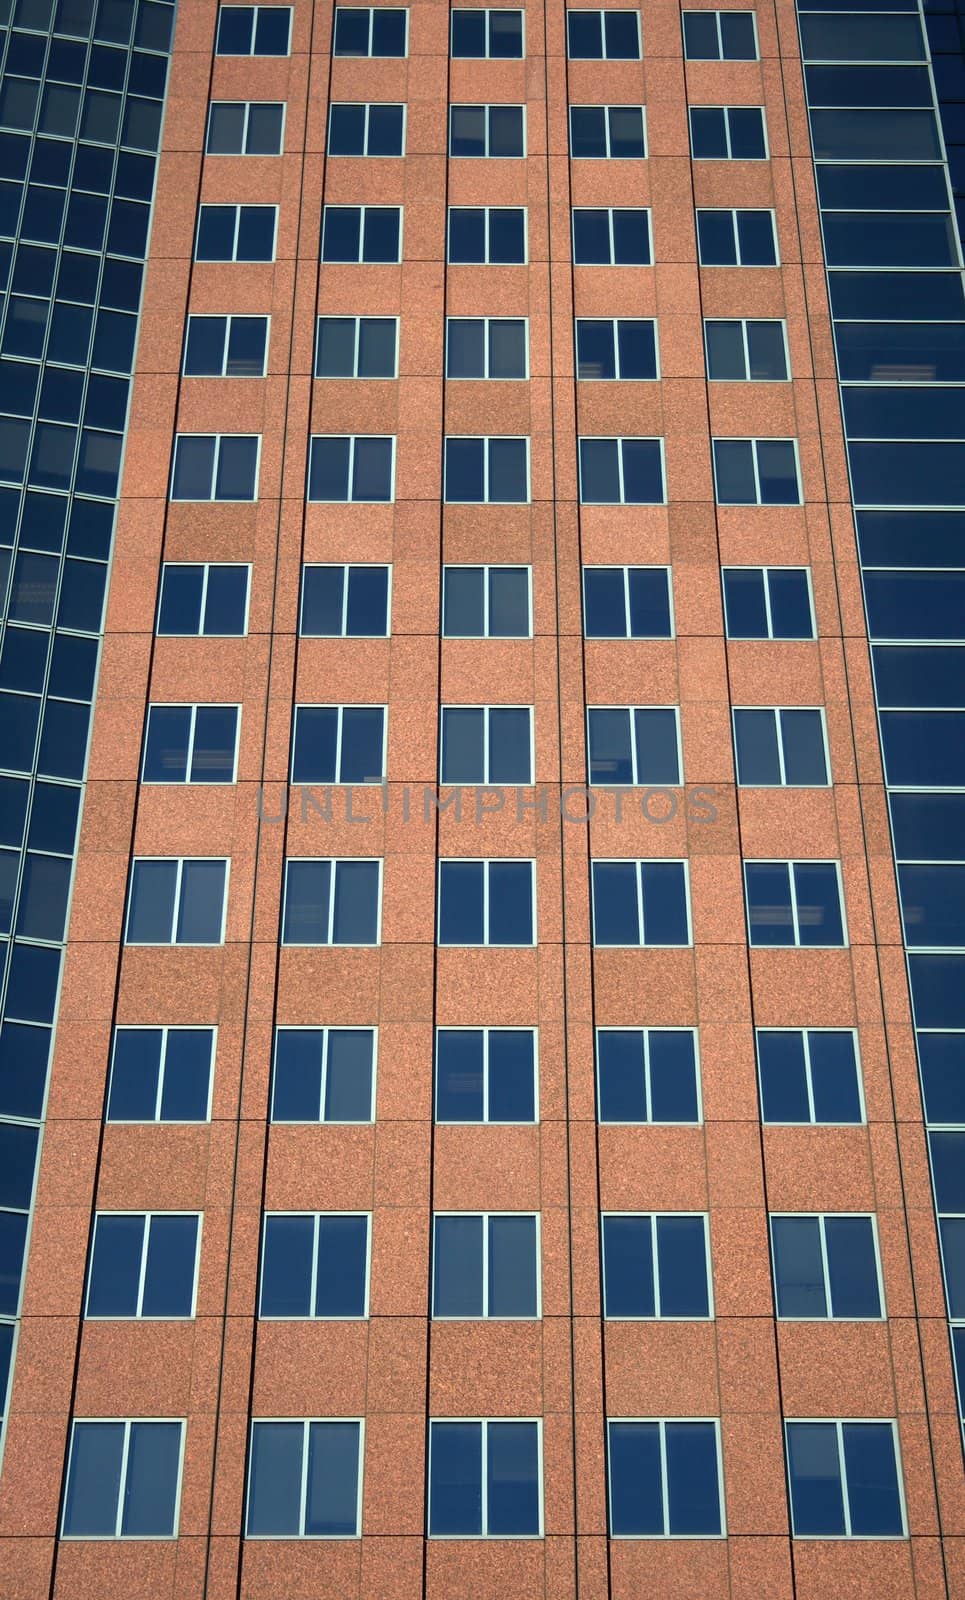 Windows of a terracotta-colored modern high-rise building.